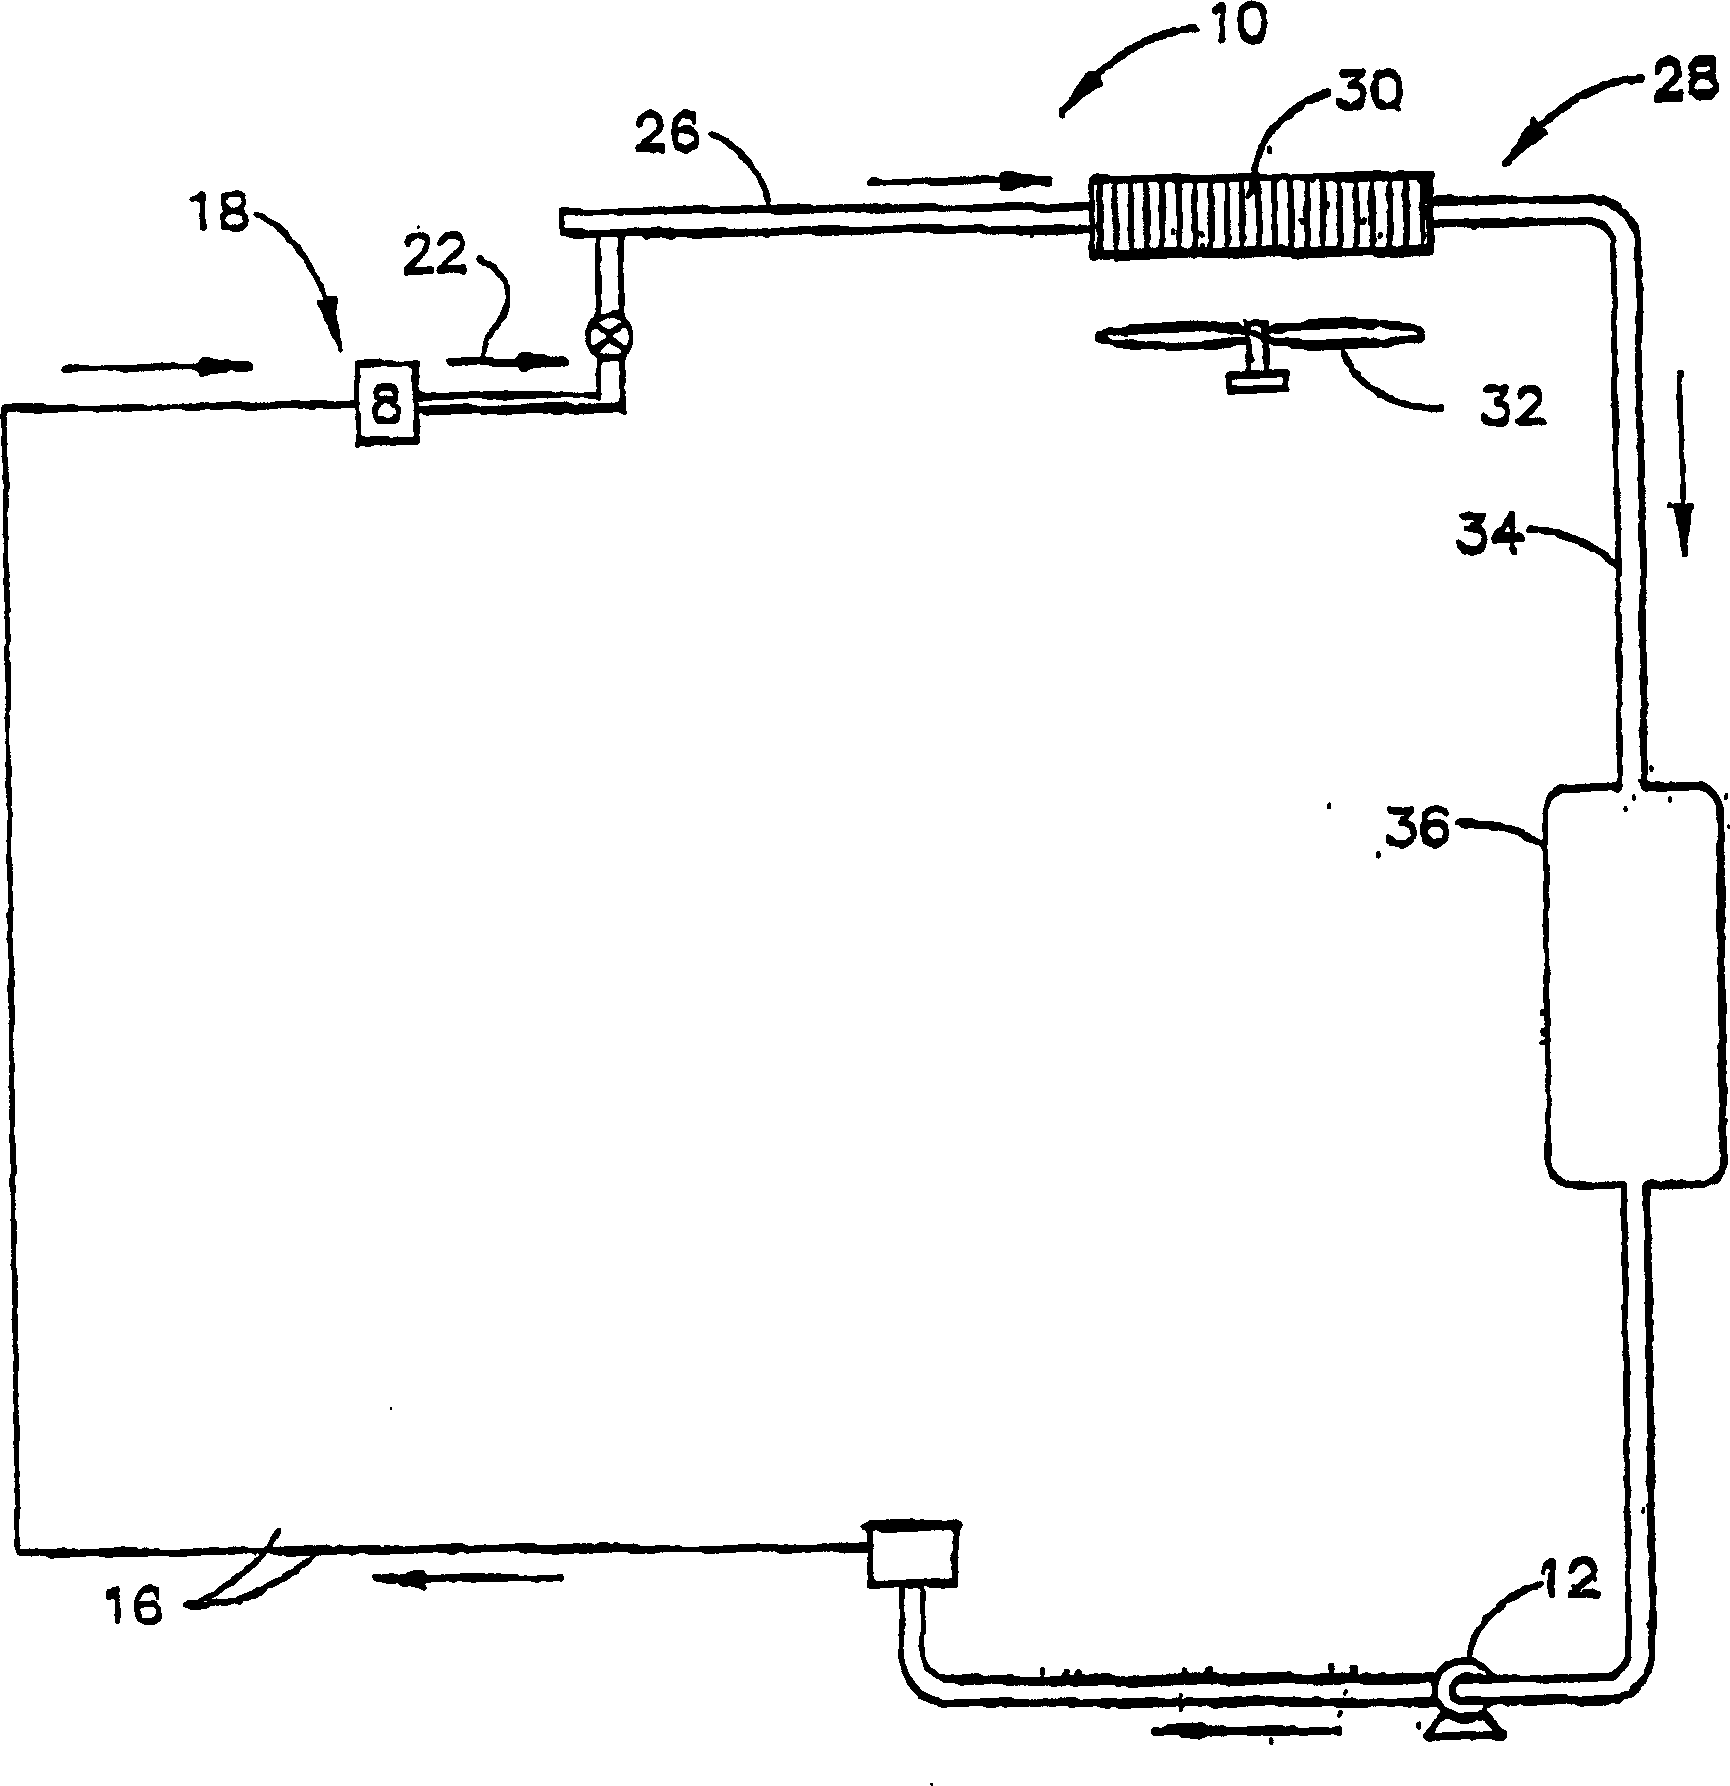 Pumped liquid cooling system using a phase change refrigerant